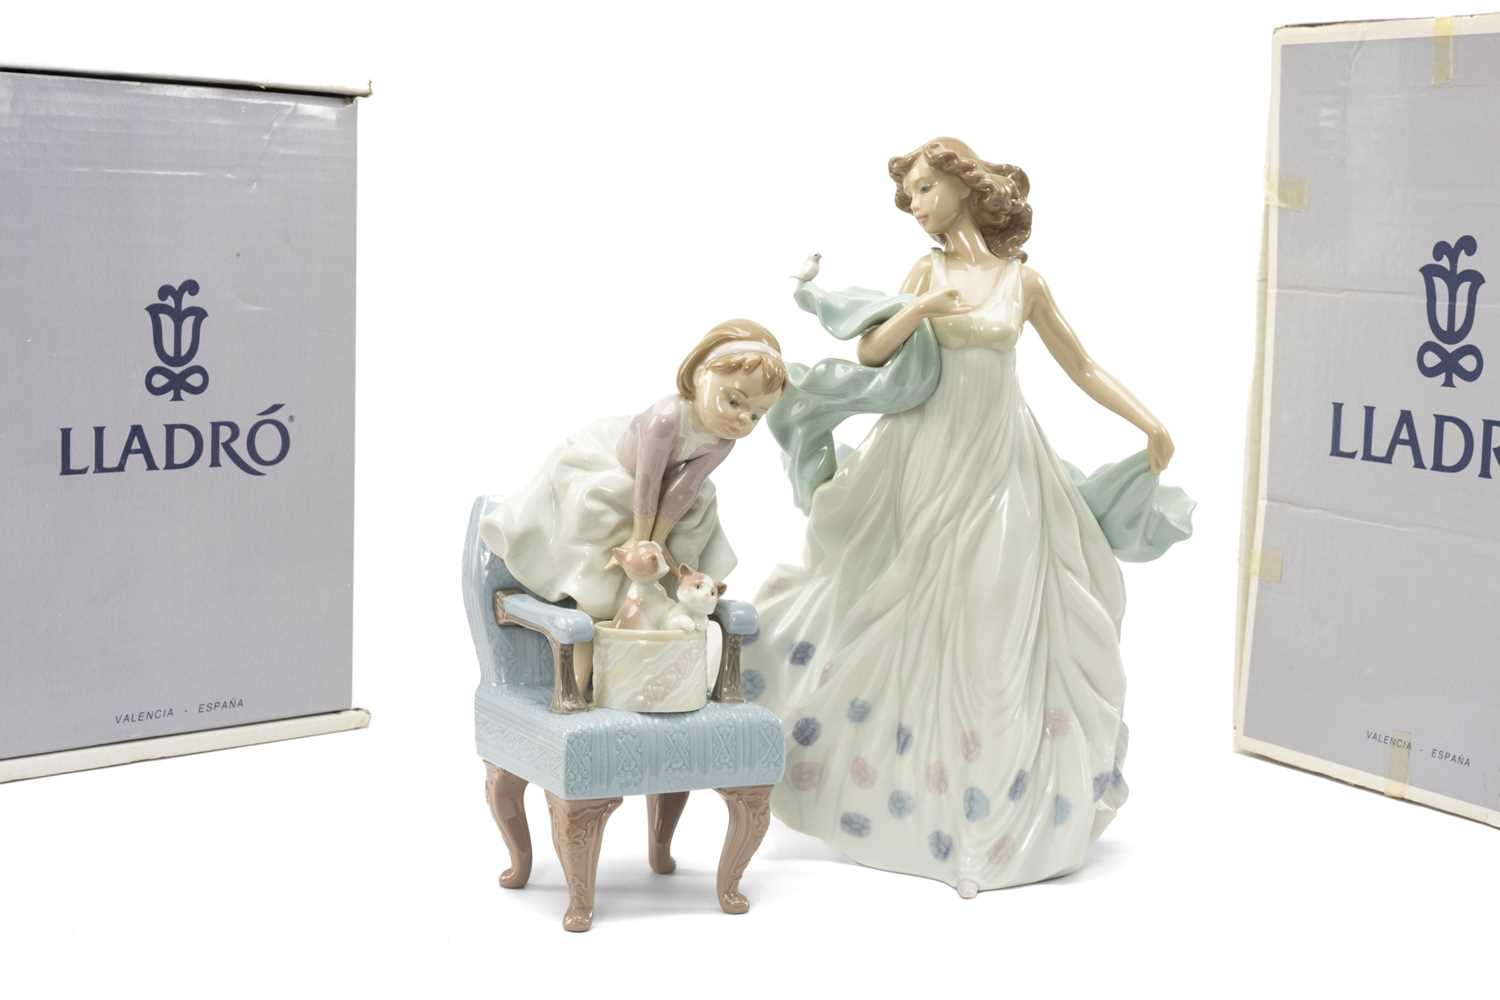 TWO LLADRO FIGURINES, Purr-Fect Friends, no. 6512 and Summer Serenade, no. 6193 (2) Provenance: